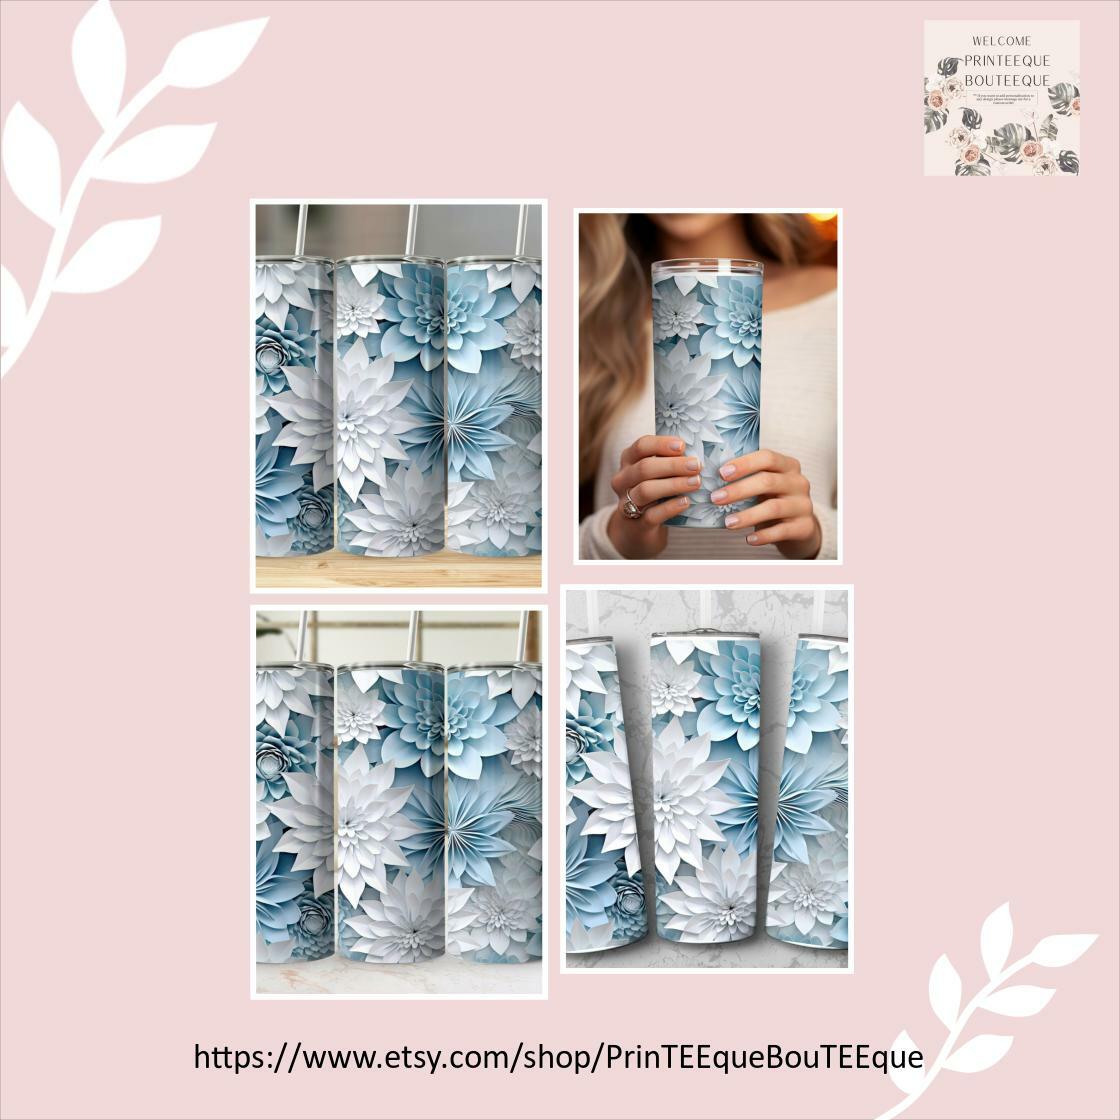 Hurry! Limited stock available. Floral Pattern Tumbler, Pastel Blue Flower Design, Insulated Travel Mug, Gift Nature Lover, BPA Free, Reusable Drinkware, Botanical Print, exclusively priced at $46.00 Don't miss out!
etsy.com/listing/164272…
#BlueFlowerMug #FloralTumbler